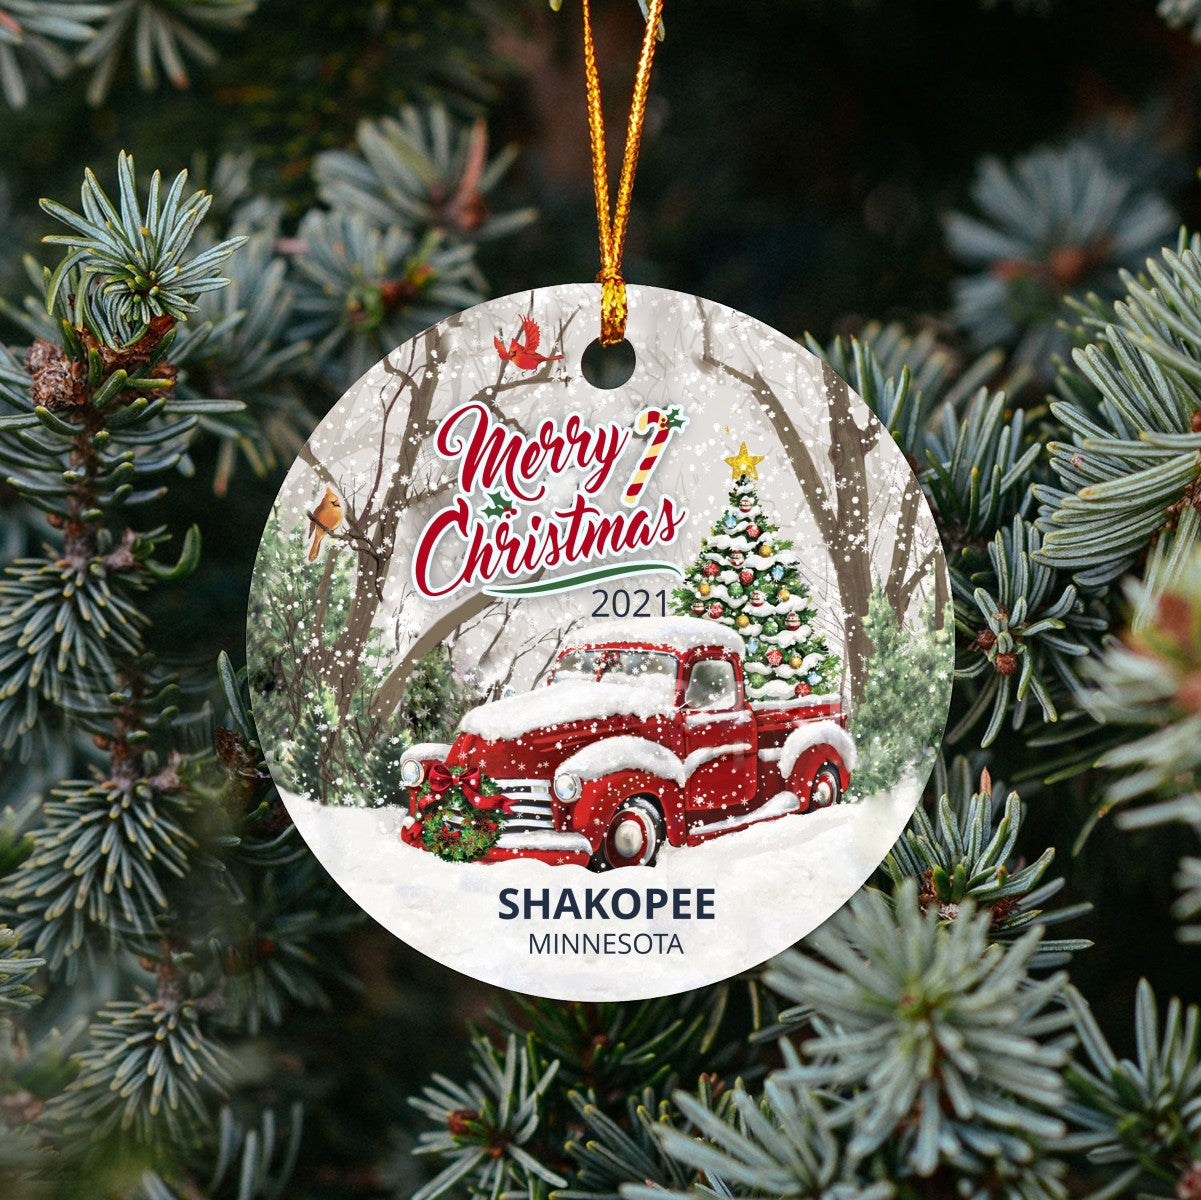 Christmas Tree Ornaments Shakopee - Ornament Customize With Name City And State Shakopee Minnesota MN - Red Truck Xmas Ornaments 3'' Plastic Gift For Family, Friend And Housewarming